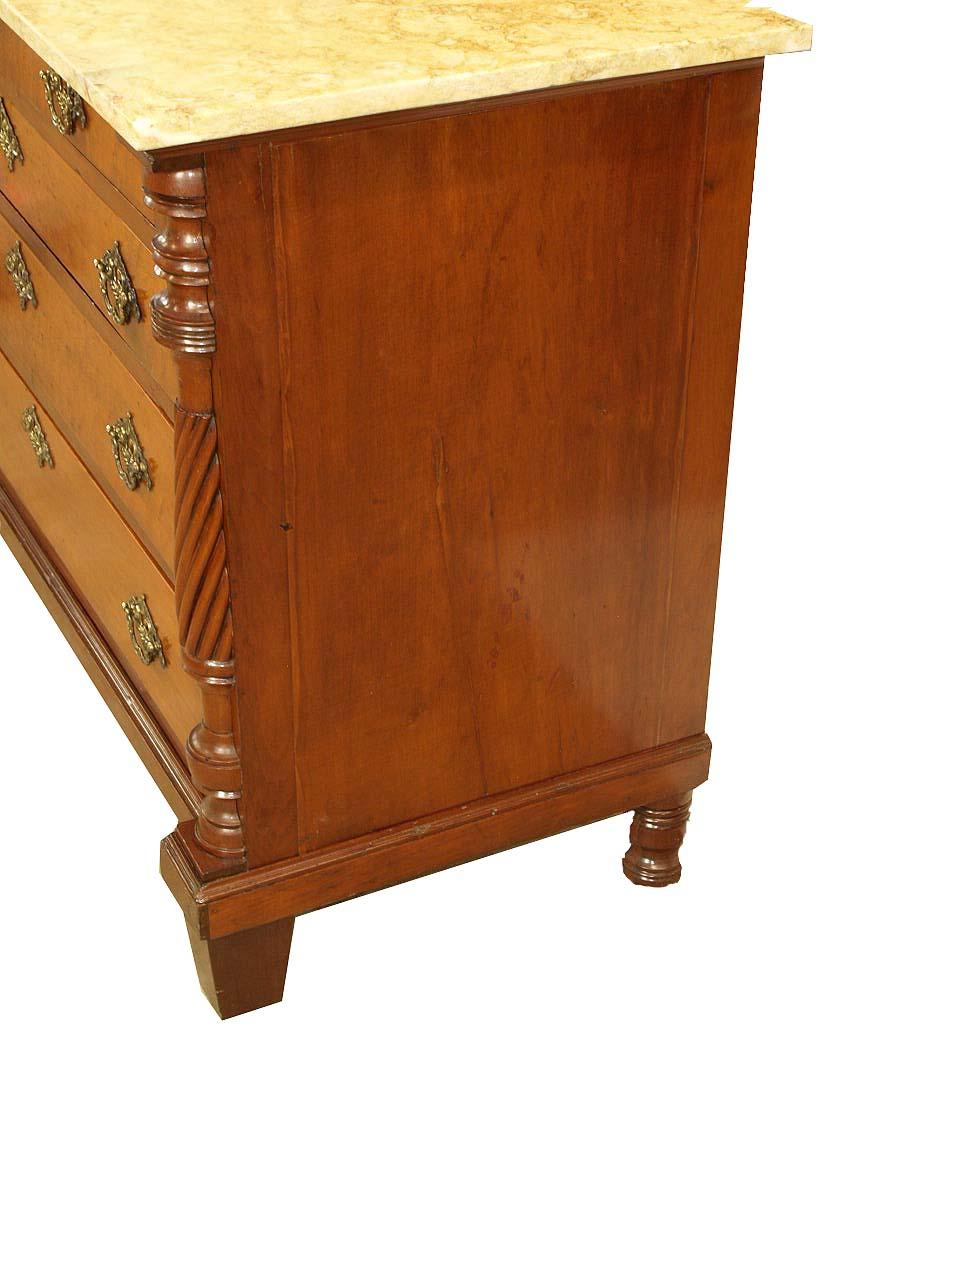 American Empire marble top chest, with beautiful figured marble, the two over three graduated drawers with ornate brass pulls and escutcheons are veneered with bird's eye maple, the rest of the chest is mahogany. The stiles feature applied pilaster